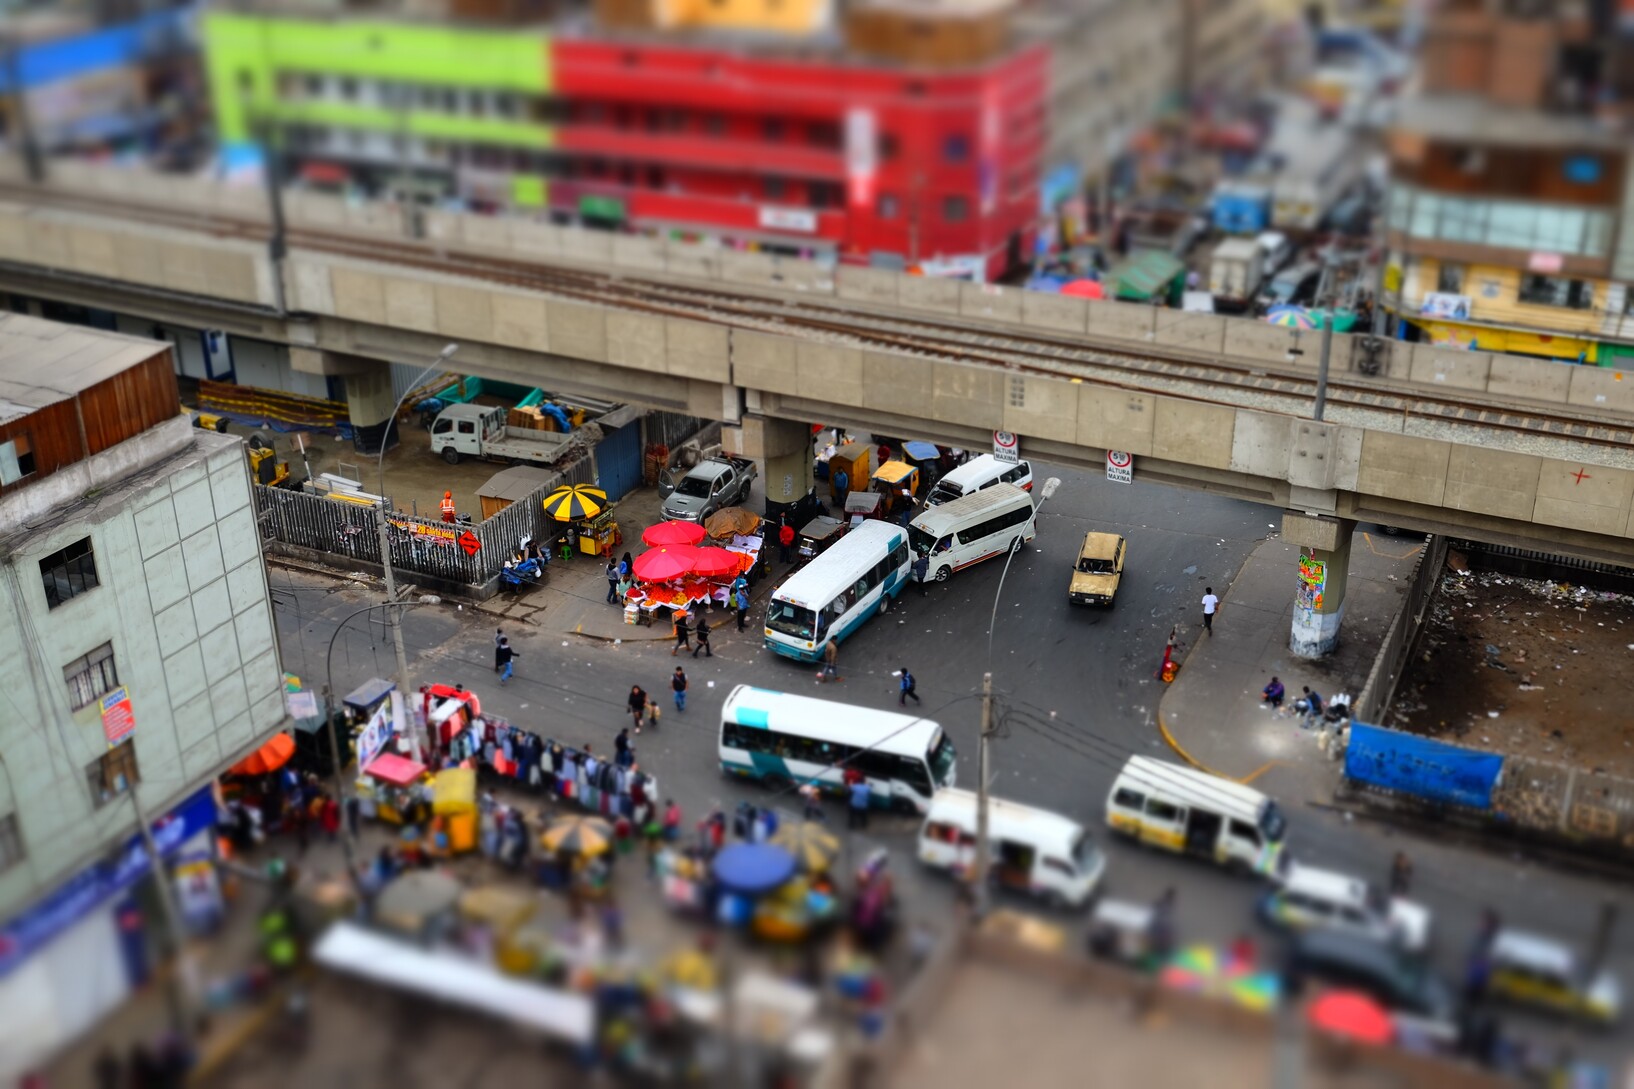 View from above on a street intersection: Queues of cars, market stalls lined up on the sidewalks. 